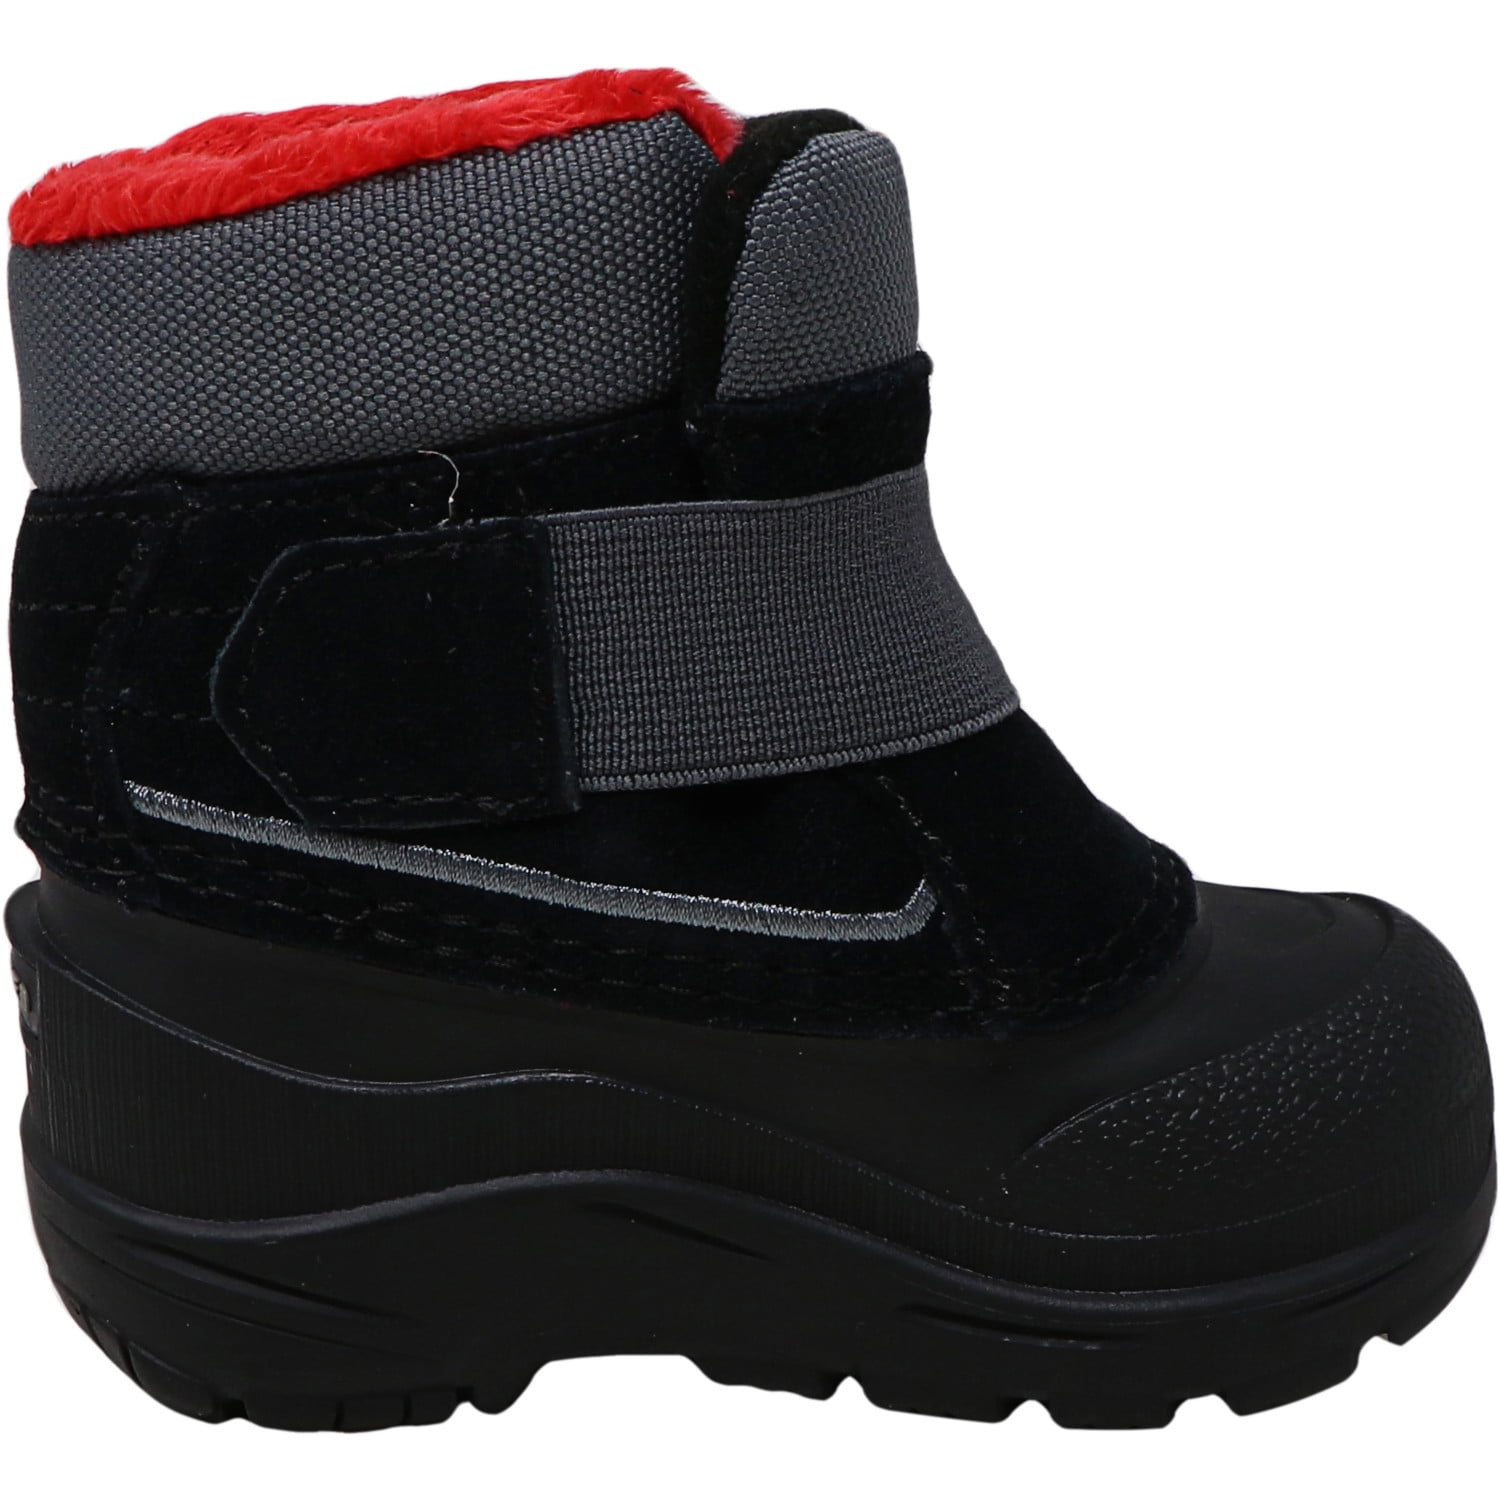 toddler alpenglow boots